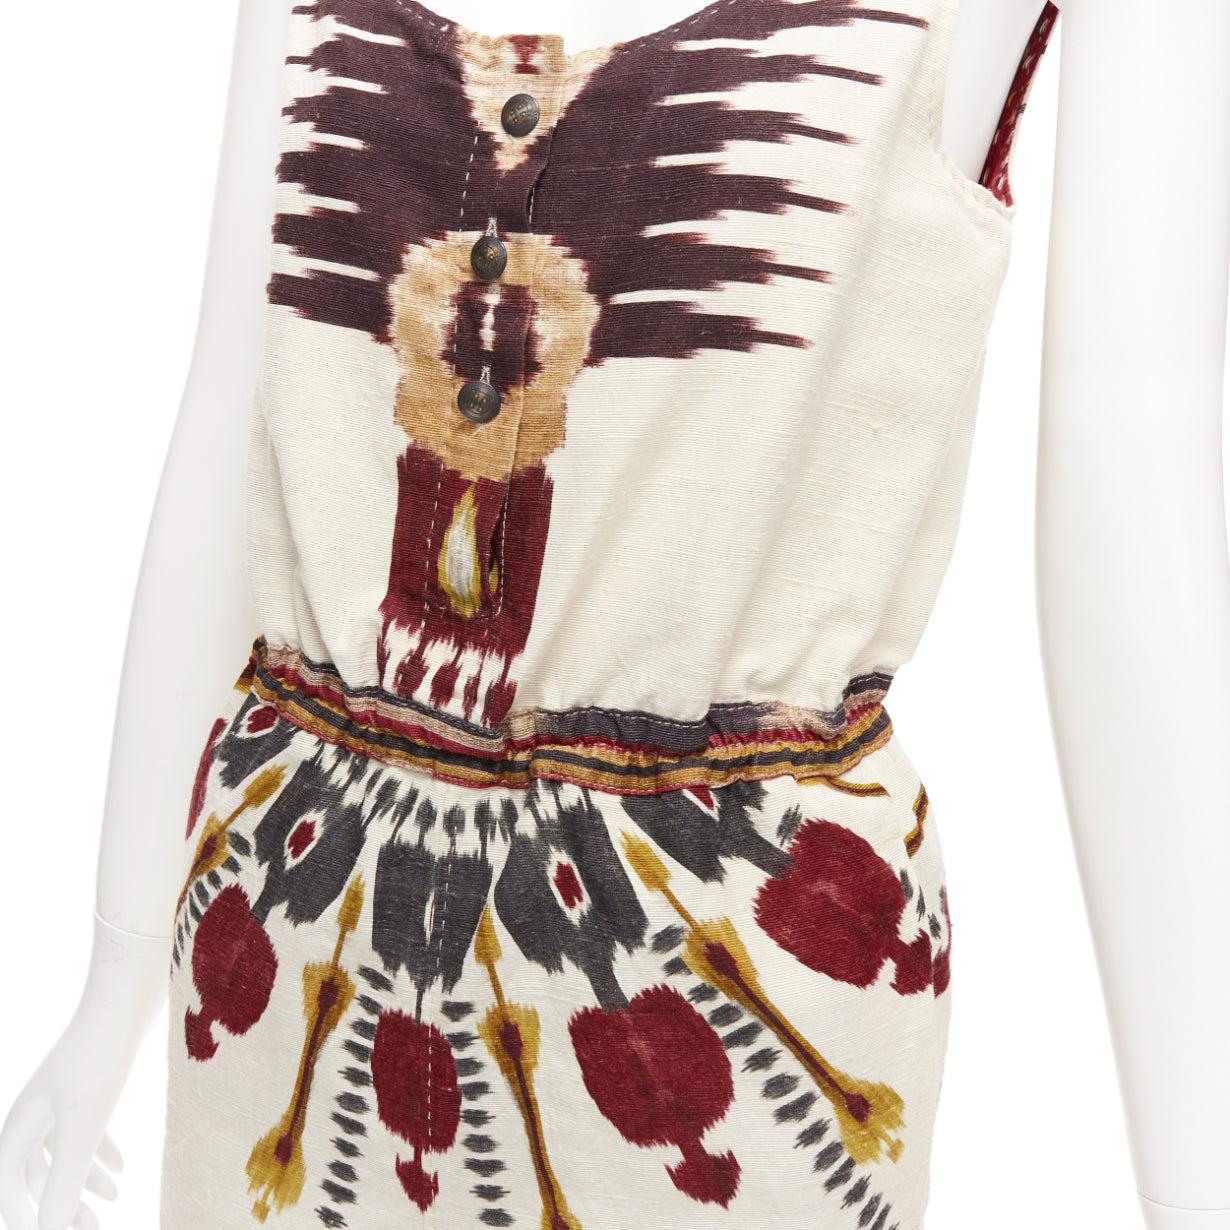 ETRO 2019 burgundy beige tribal aztec print scoop neck short romper IT38 XS
Reference: AAWC/A00728
Brand: Etro
Collection: 2019
Material: Silk, Cotton
Color: Multicolour, Beige
Pattern: Aztec
Closure: Button
Lining: Burgundy Fabric
Made in: